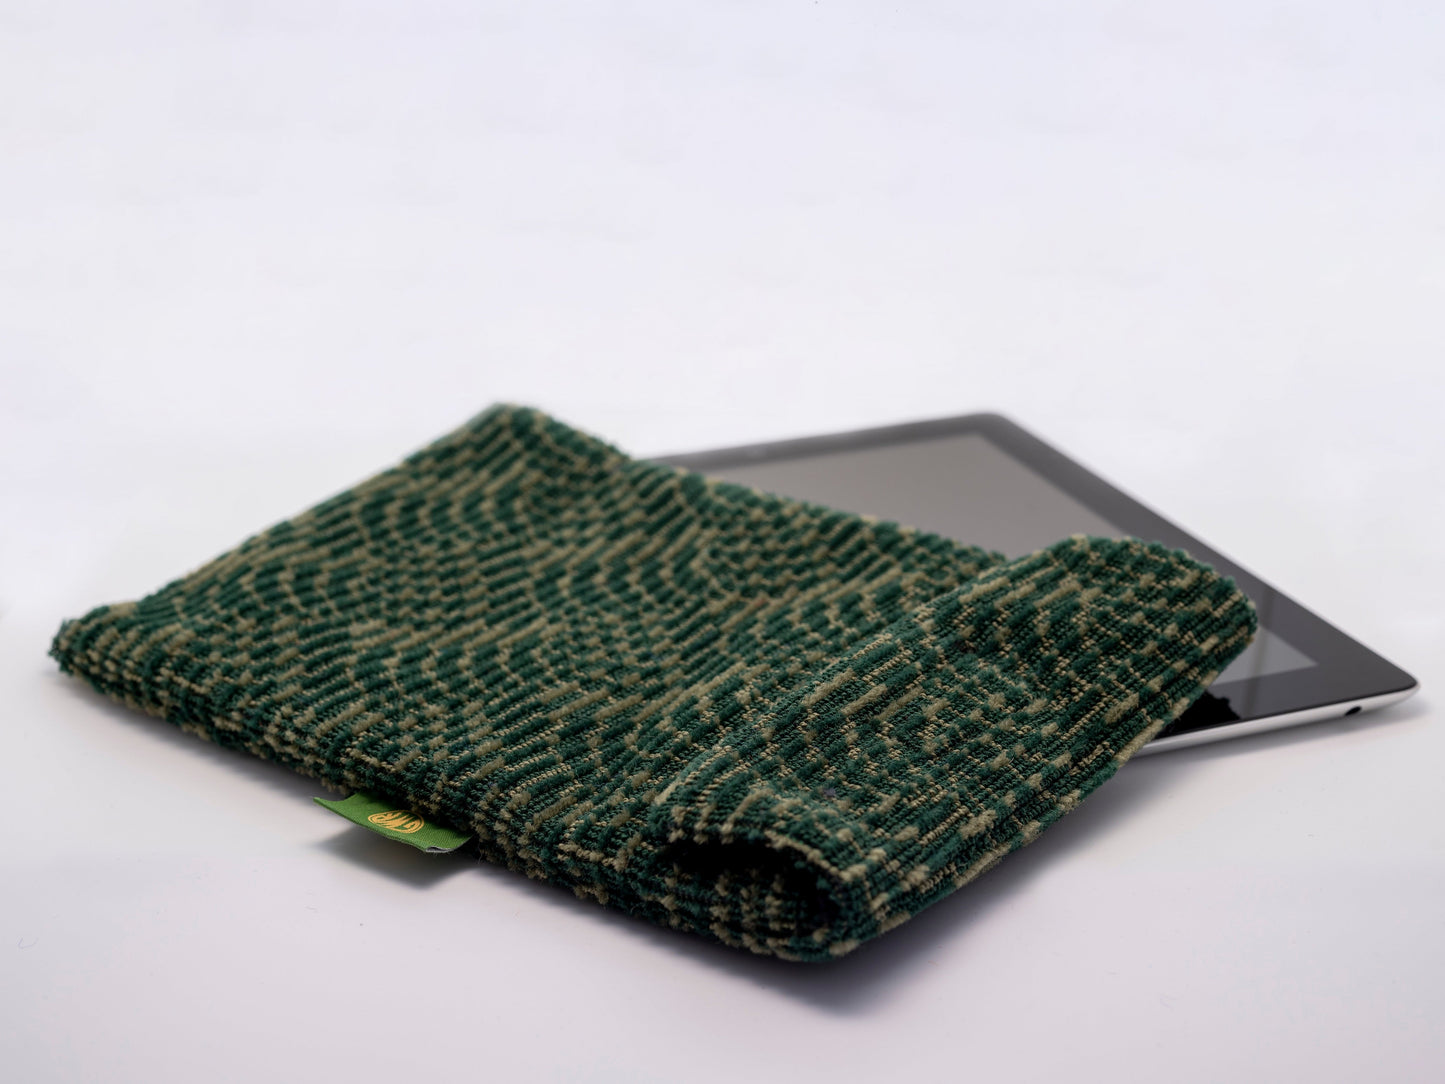 GWR Great Western Shell Moquette Tablet/iPad case